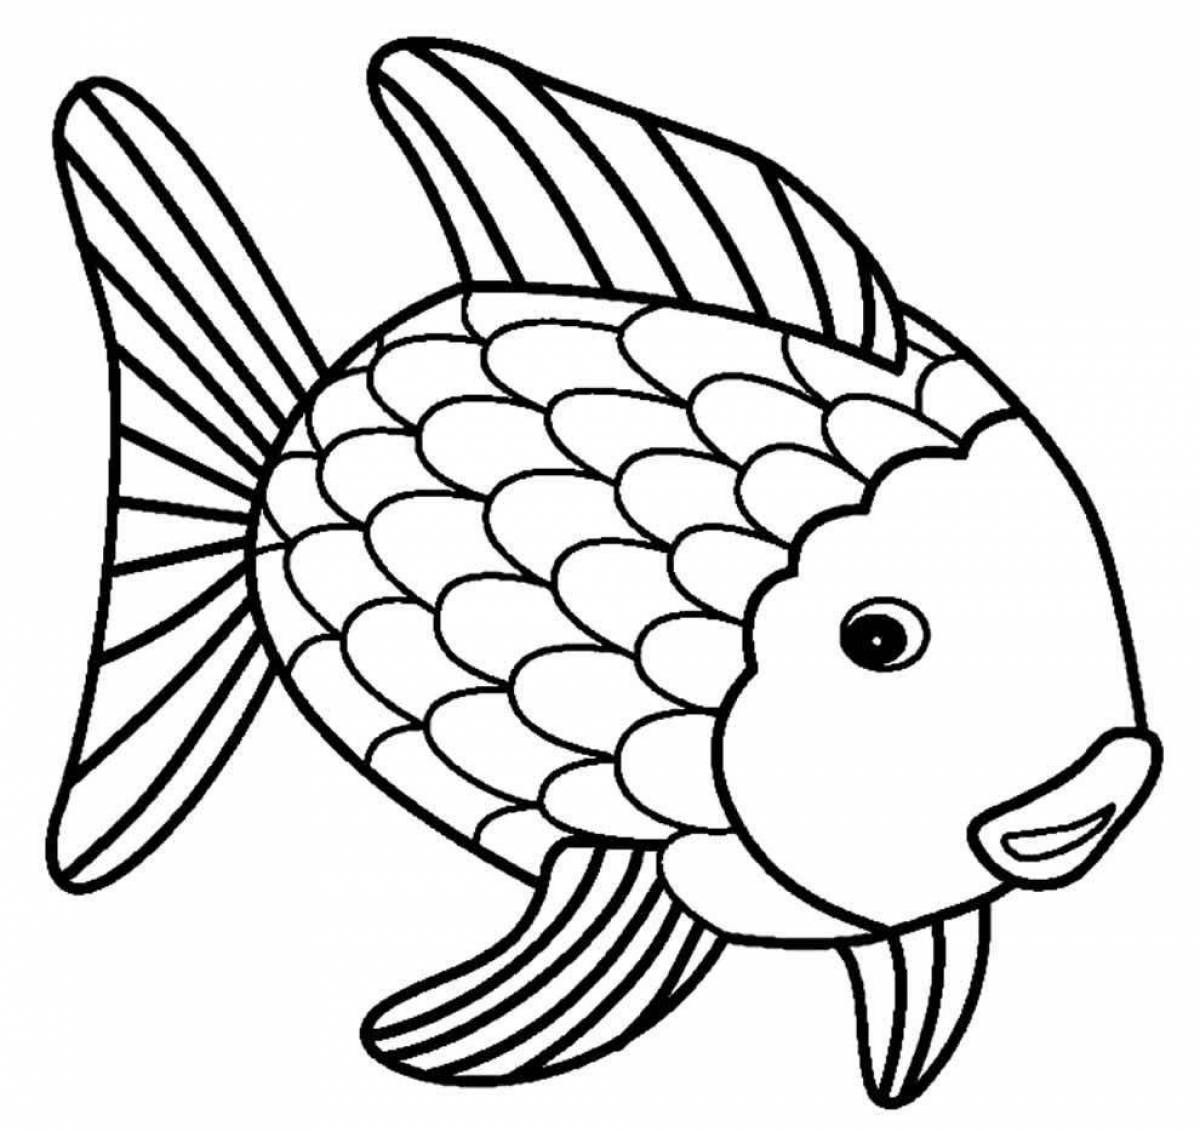 Fantastic fish coloring book for children 5-6 years old